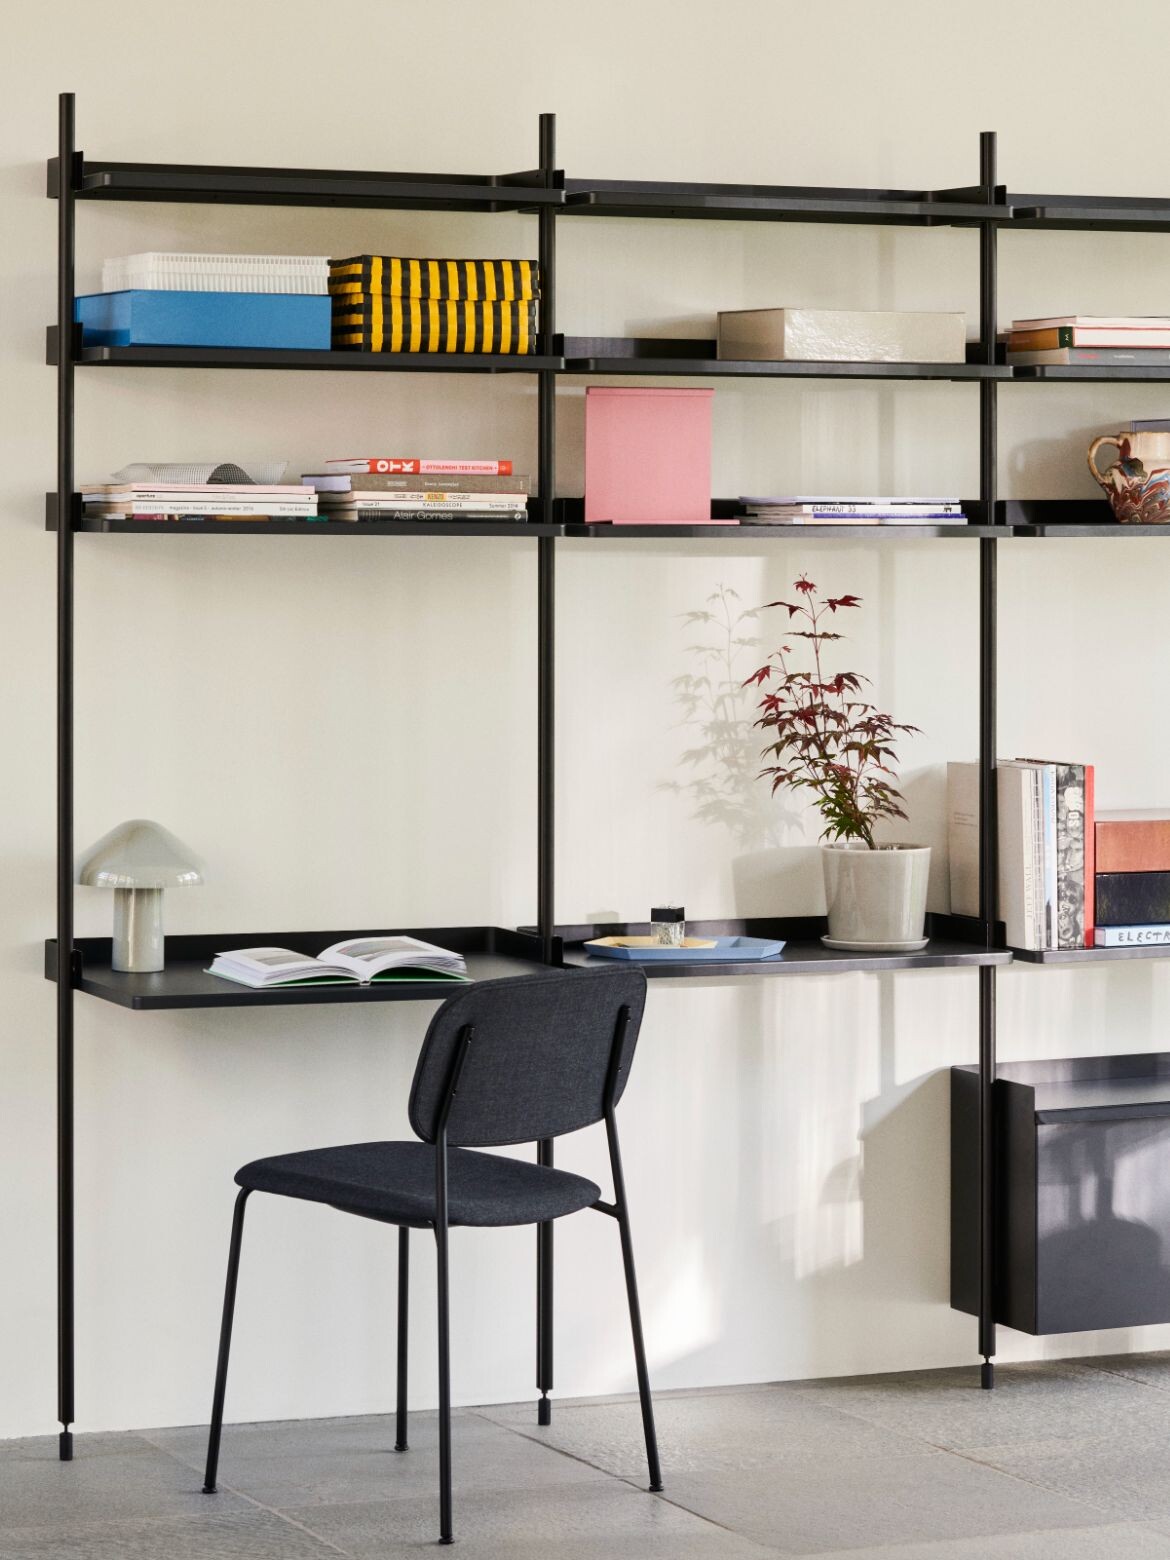 43 products to create your very own home office